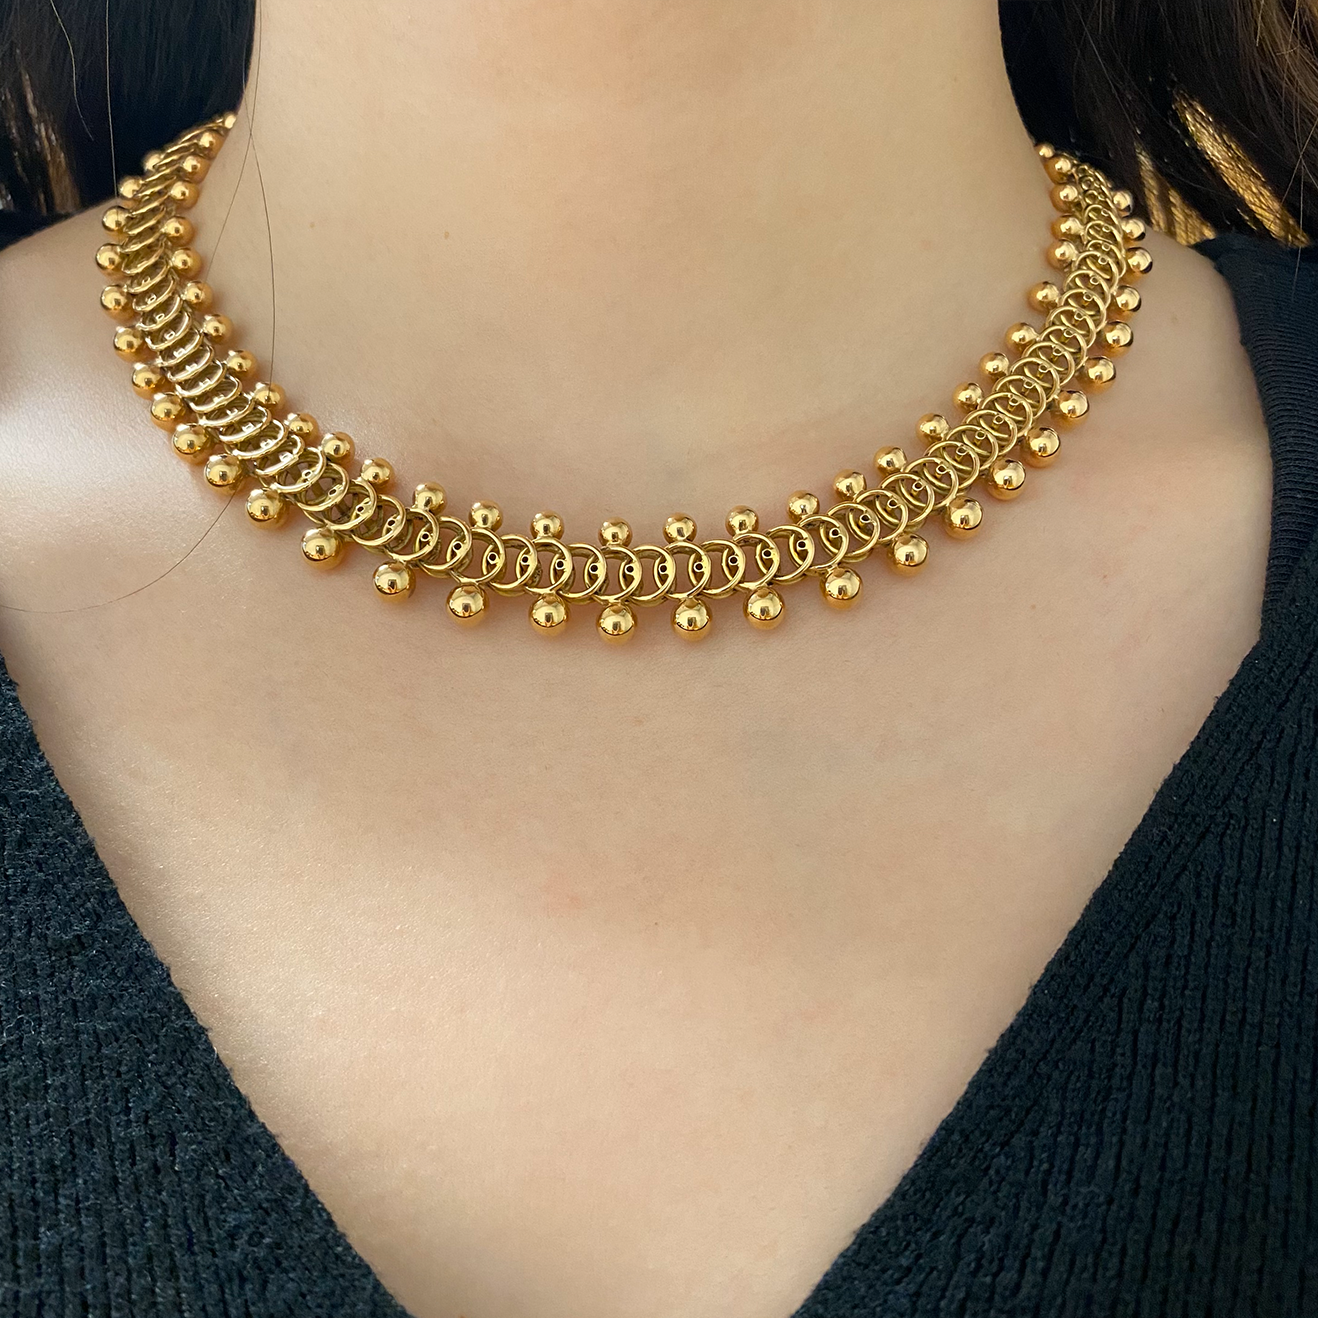 1950s 18KT Yellow Gold Necklace worn on neck